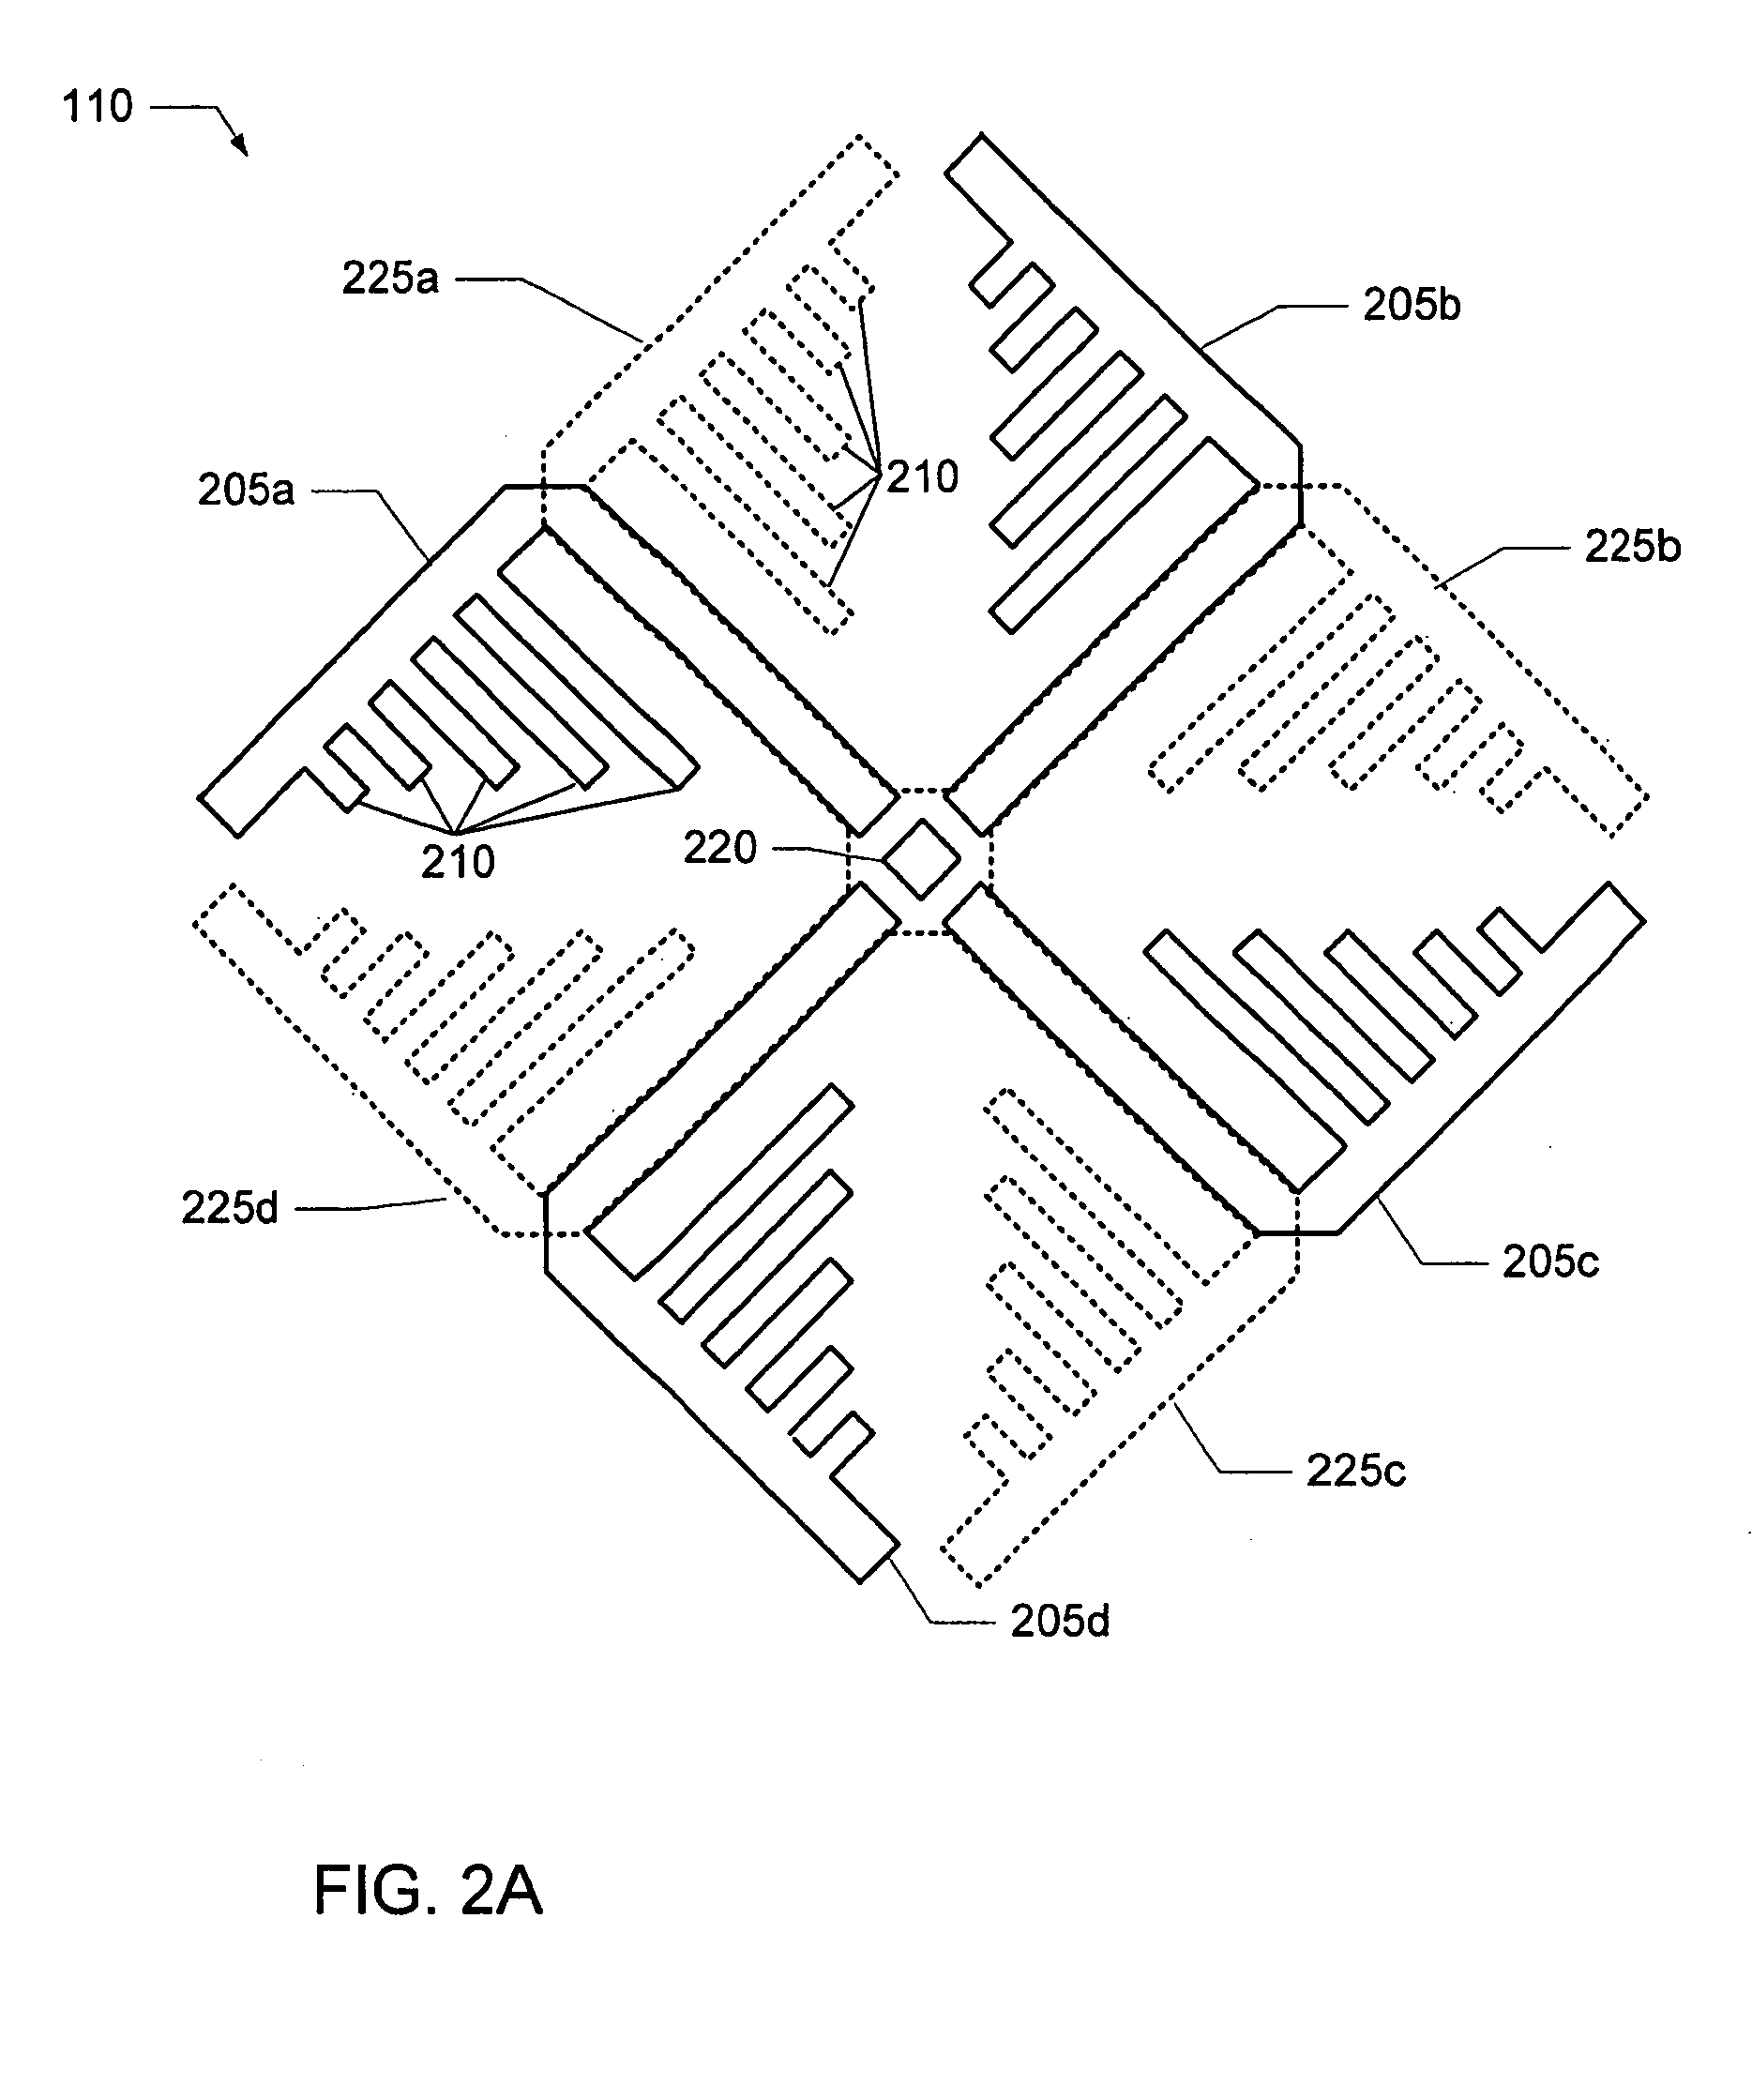 System and method for a minimized antenna apparatus with selectable elements